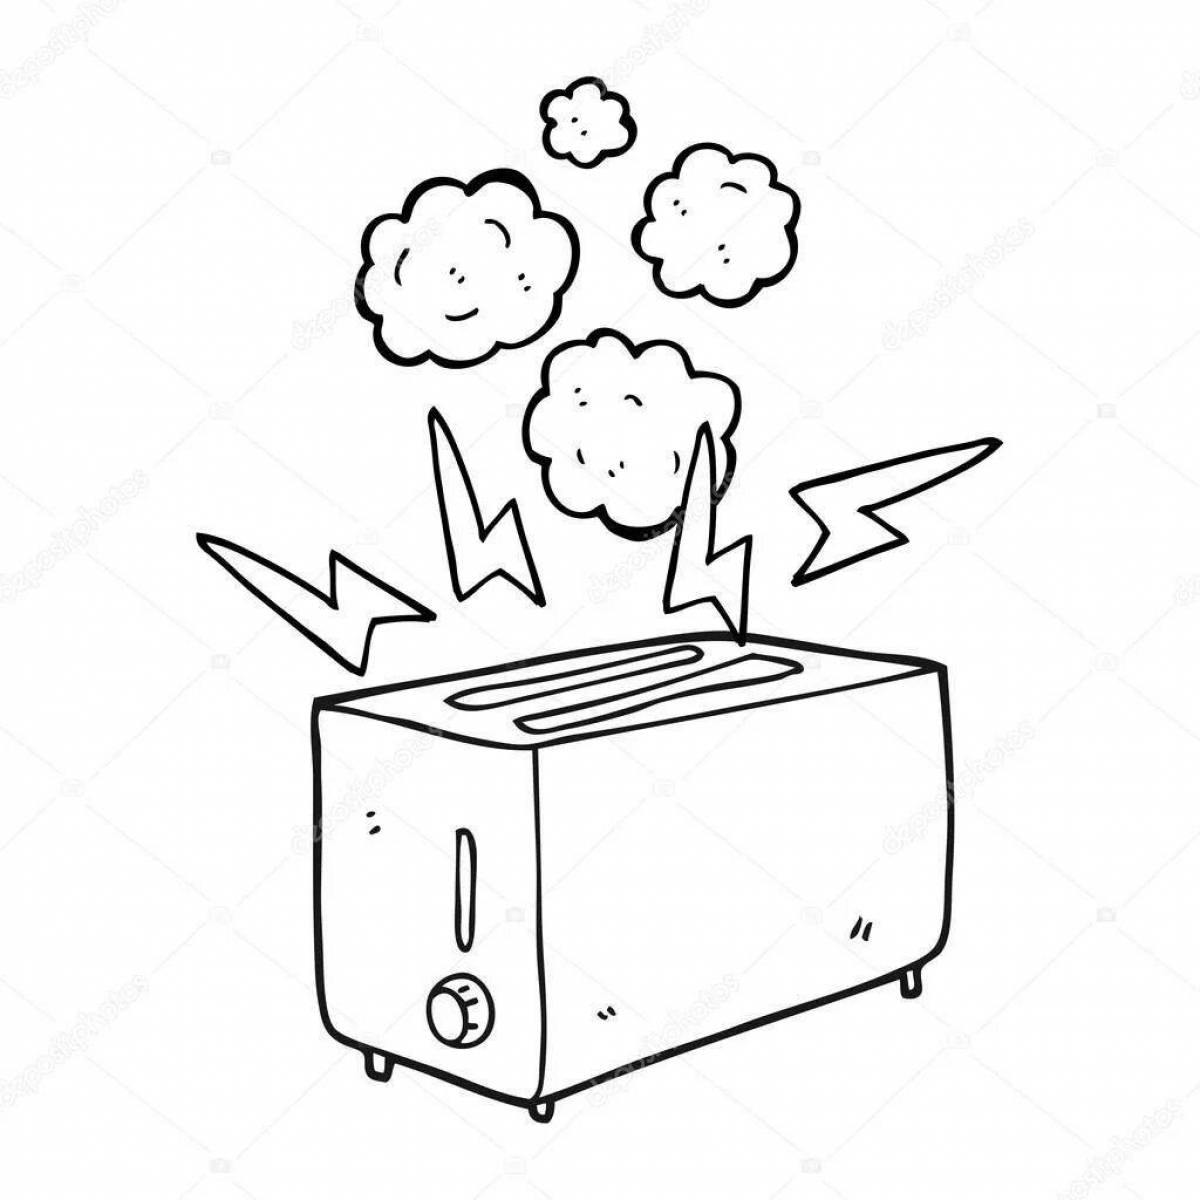 Animated toaster coloring page